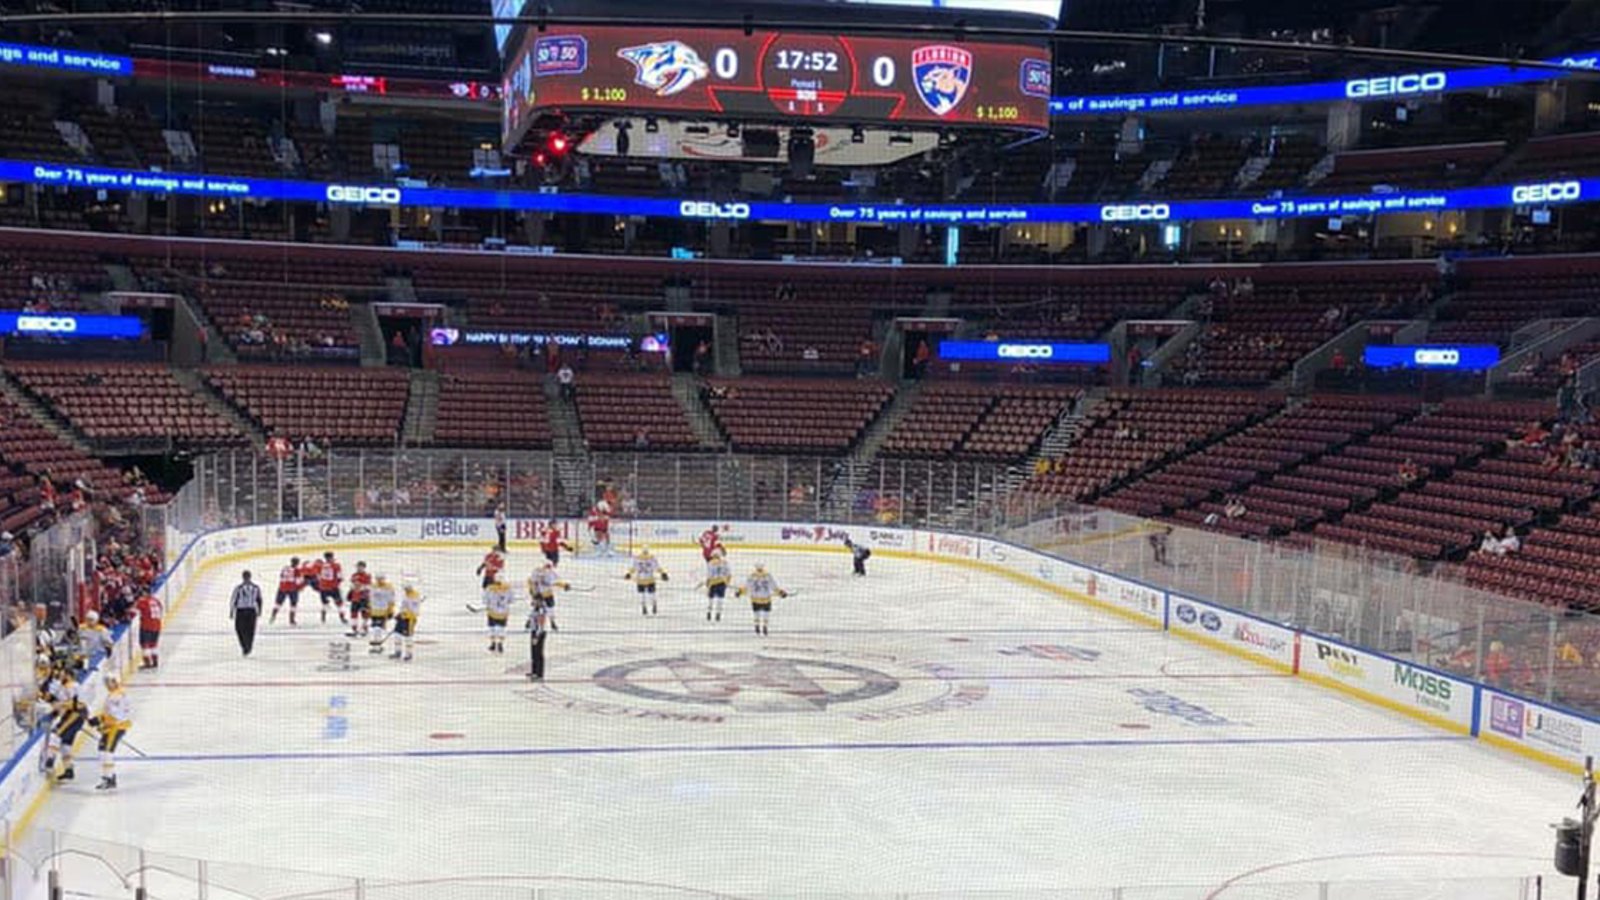 Panthers set embarrassing new low in attendance for preseason game against Preds